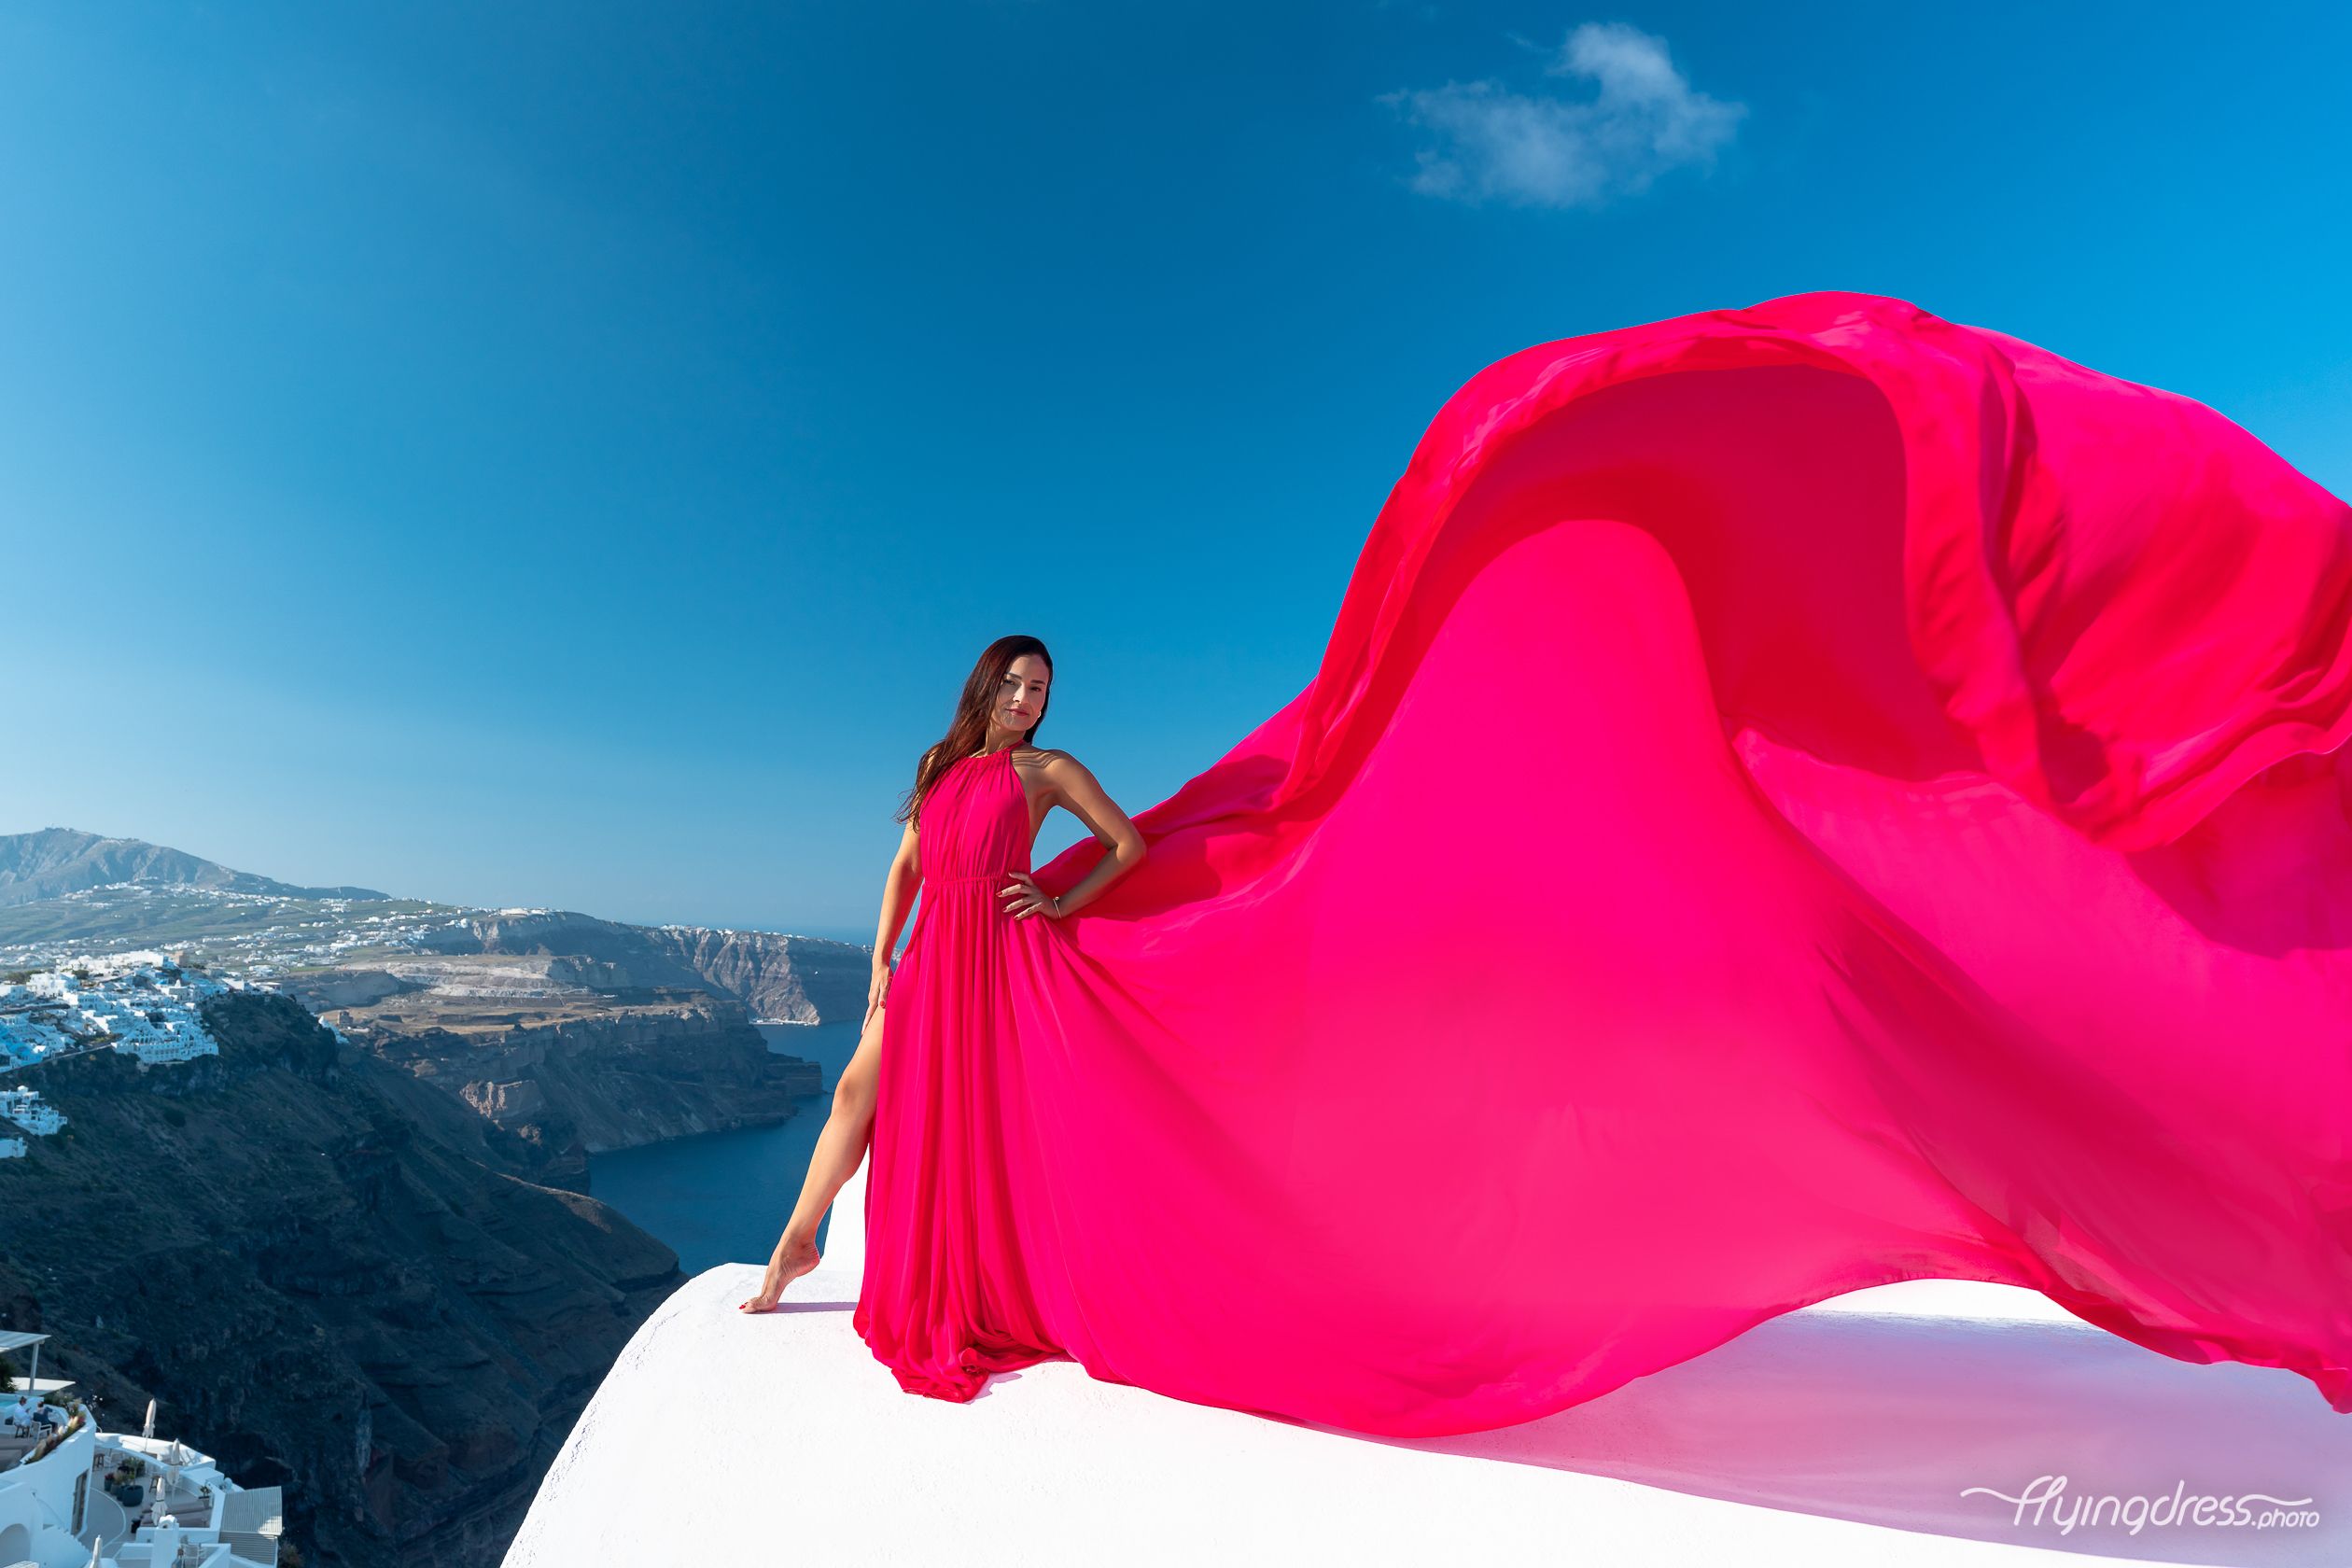 A lady in a fuchsia pink flying dress exudes a vibrant allure, adding a burst of color to the picturesque scenery of Santorini's landscapes.